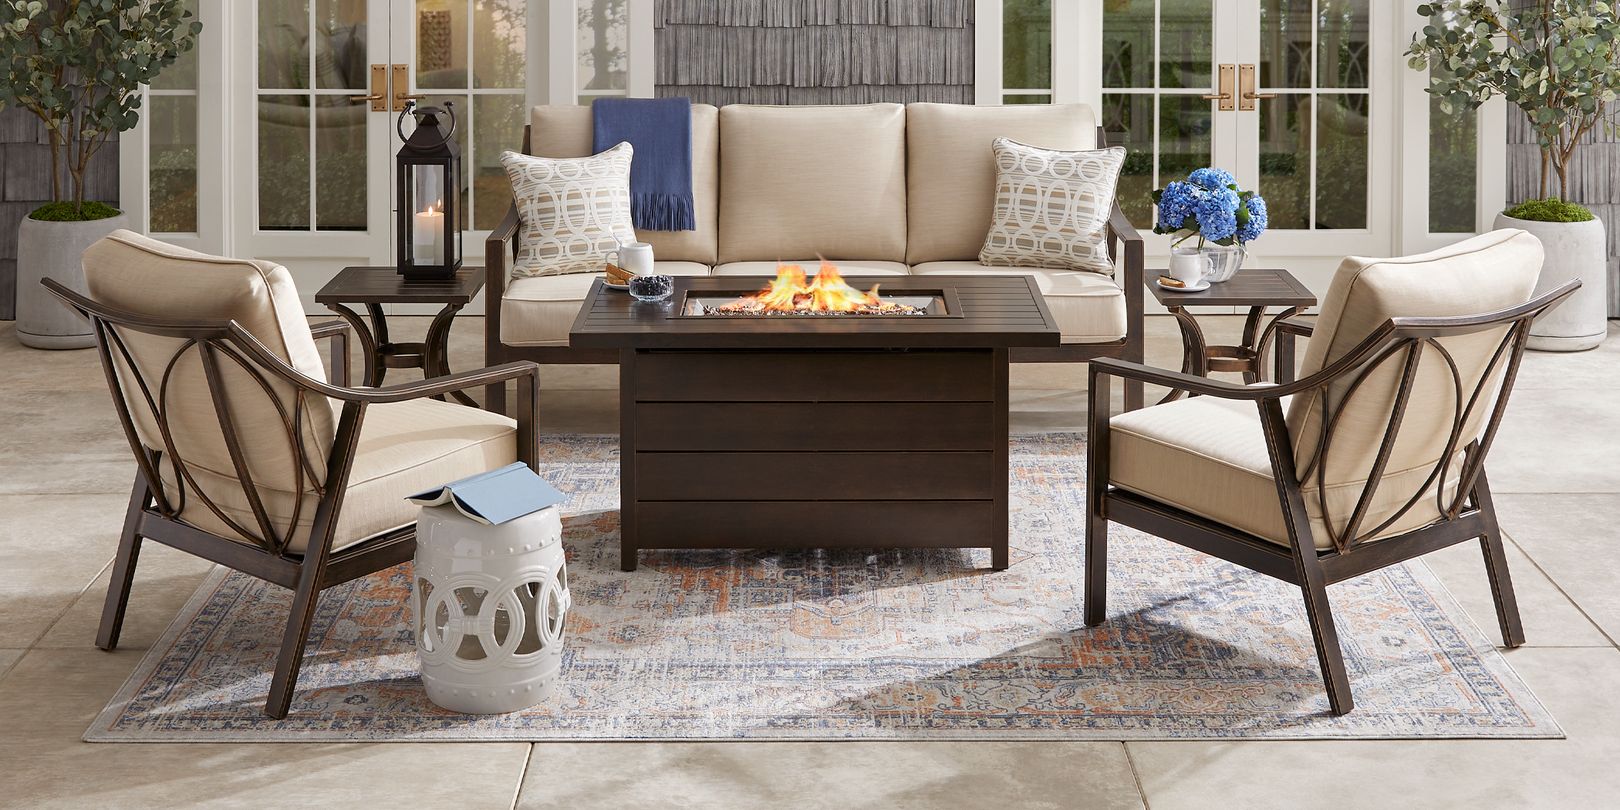 photo of a bronze outdoor sofa and two chairs with a brown fire pit table set over a patio rug